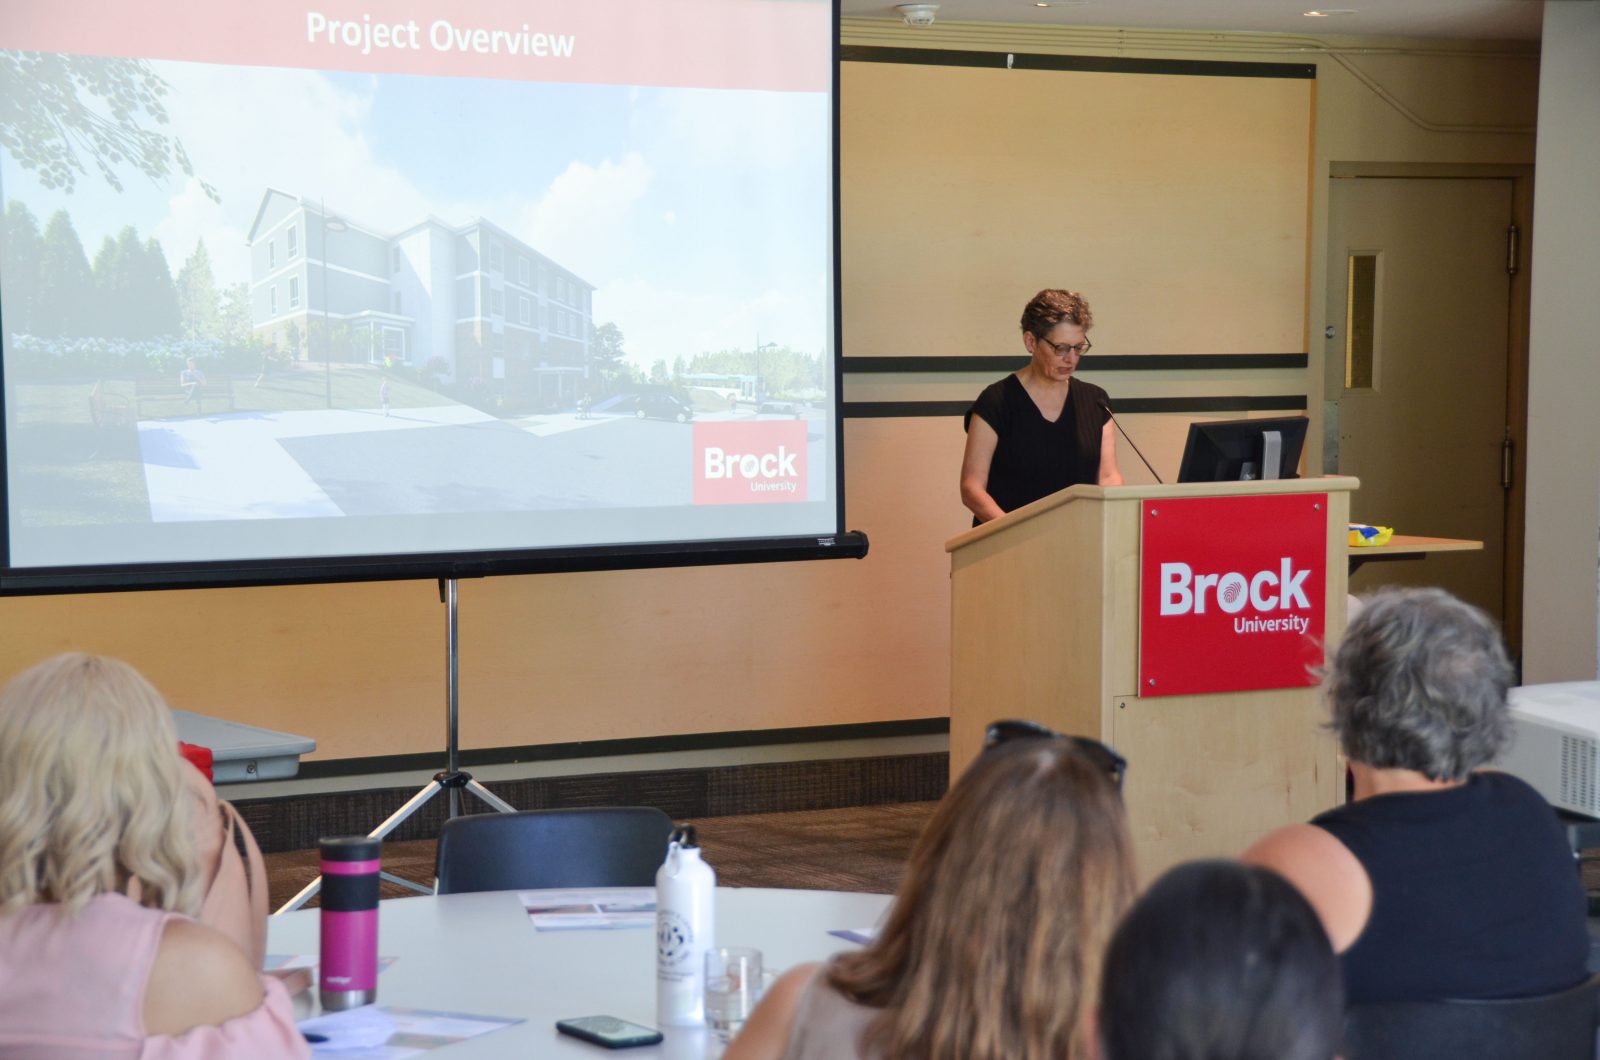 A woman with glasses and wearing a black blouse stands behind a wooden podium labelled Brock University speaking into a microphone. To the left is a slide displayed on a screen. People's heads listening appear in the foreground.